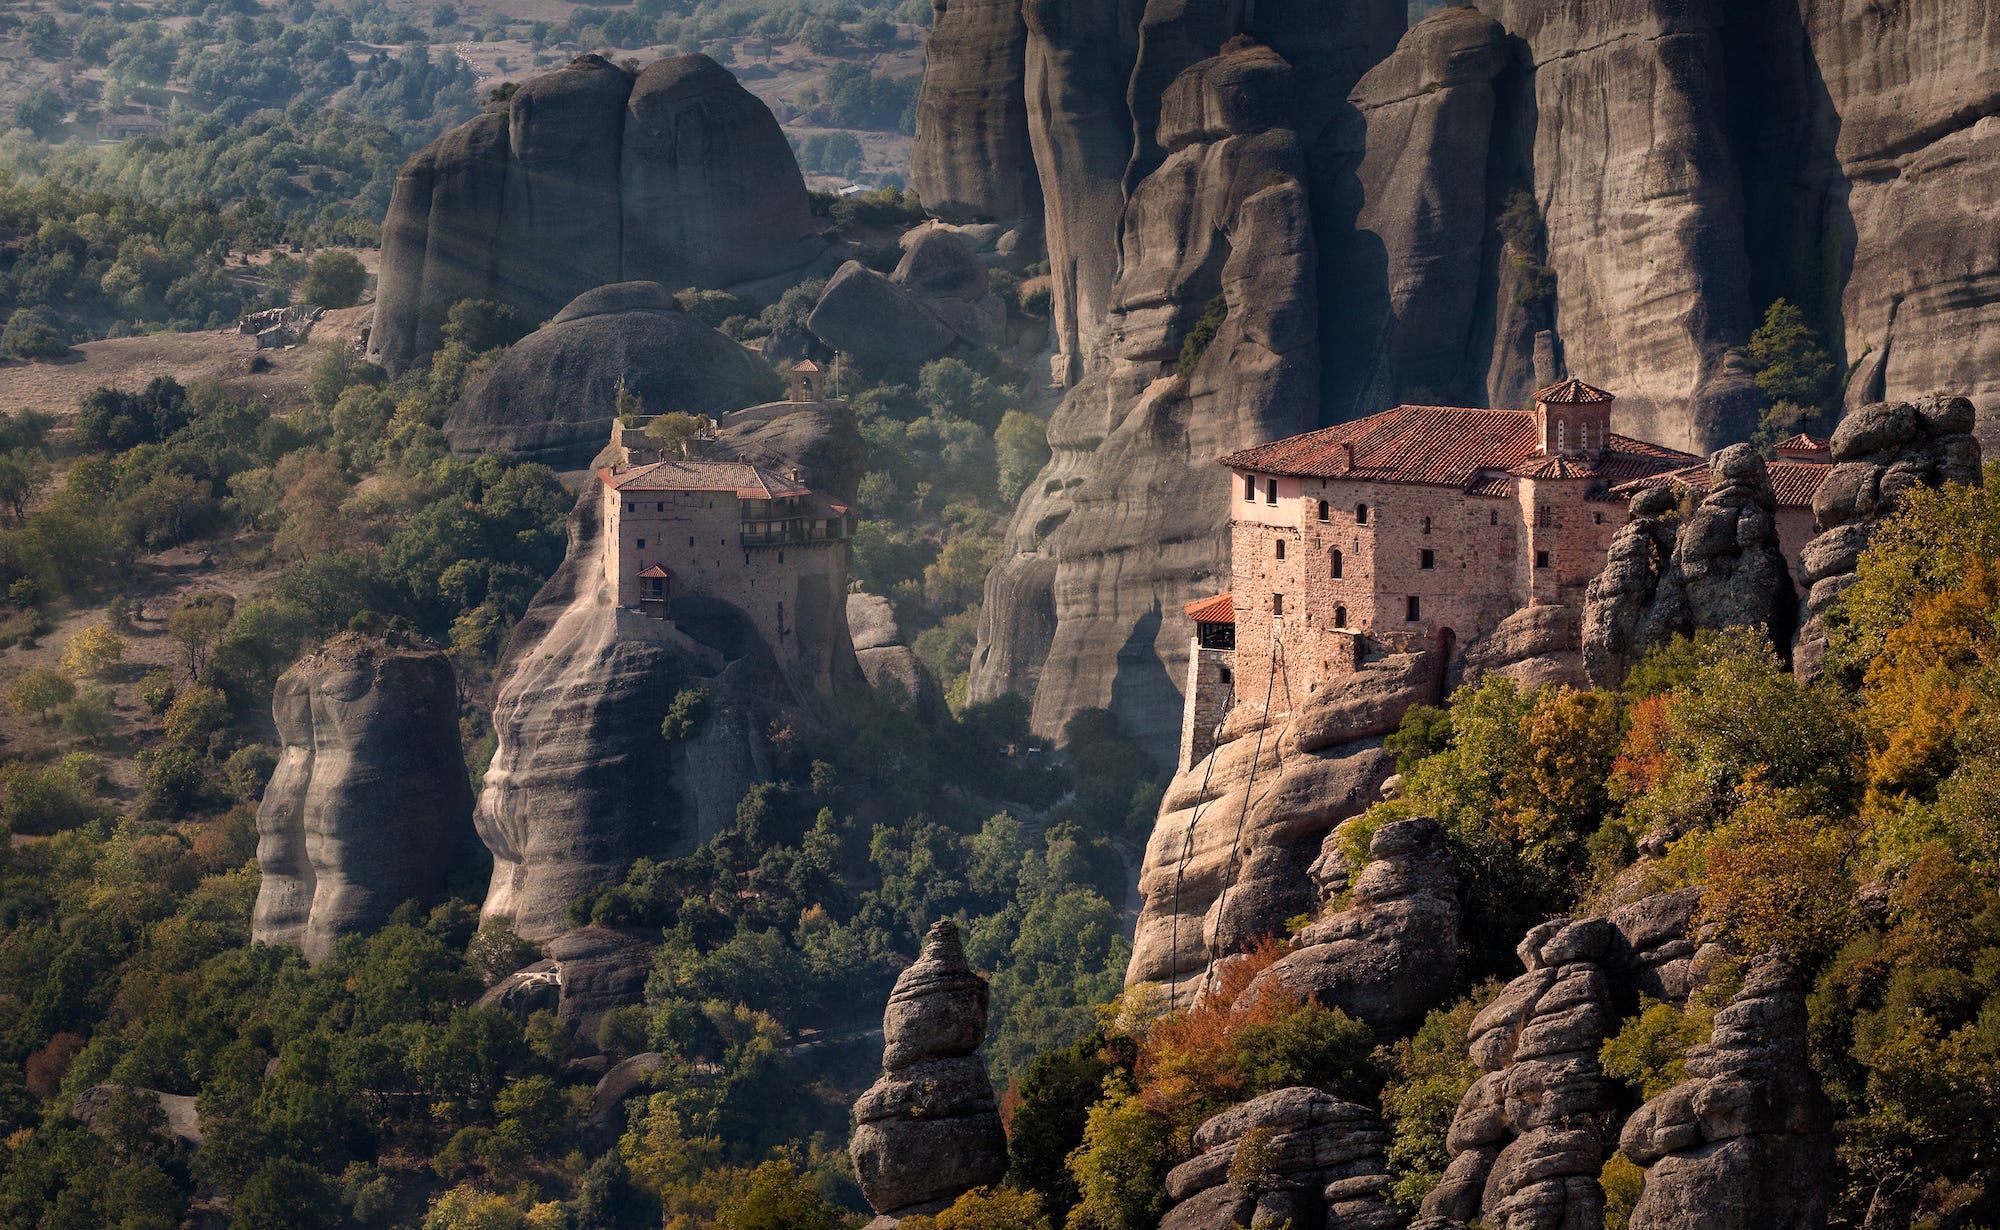 <p>Meteora is another childhood trip I'll always remember. Located in central Greece, the Meteora monasteries — now a UNESCO World Heritage Site — are perched on huge cliffs that will take your breath away. </p><p>Orthodox Christian hermit monks first began coming to the cliffs of Meteora around the 9th century, looking for peace and isolation. In the 14th century, the first Meteora monastery was built, spearheading the beginning of the site's monastic community, according to <a href="https://visitmeteora.travel/meteora-monasteries/">Visit Meteora</a>. Six of the 24 monasteries remain active today with more than 60 nuns and monks. </p><p>"It's absolutely amazing to realize that monks built these monasteries and lived there for centuries," my mom said. "The unique rock formations and nice sunsets offer many photo opportunities. It's a really special place that makes me feel close to heaven." </p>